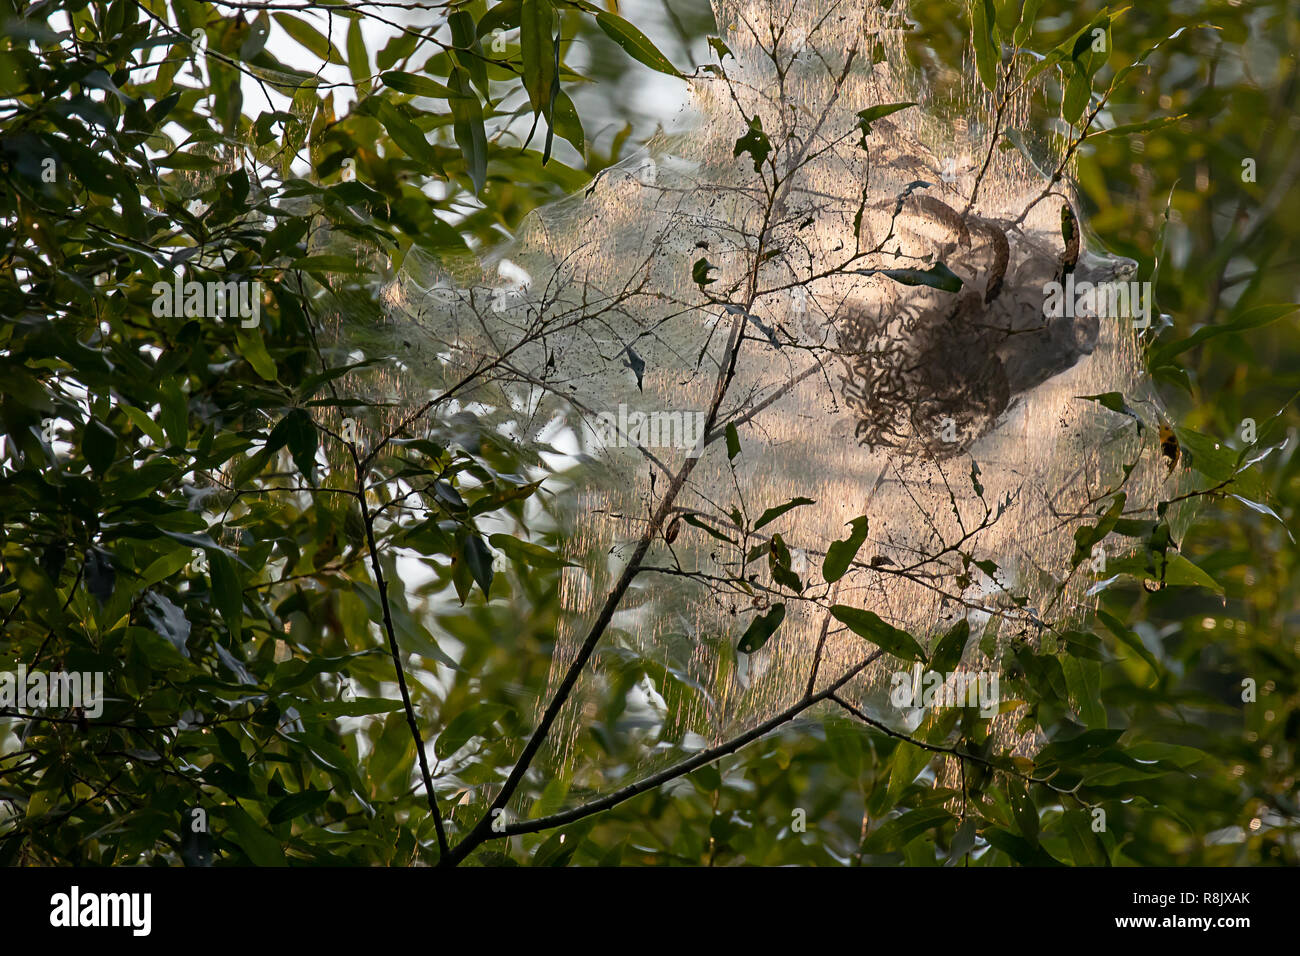 nest of caterpillars in late summer months hanging from tree Stock Photo